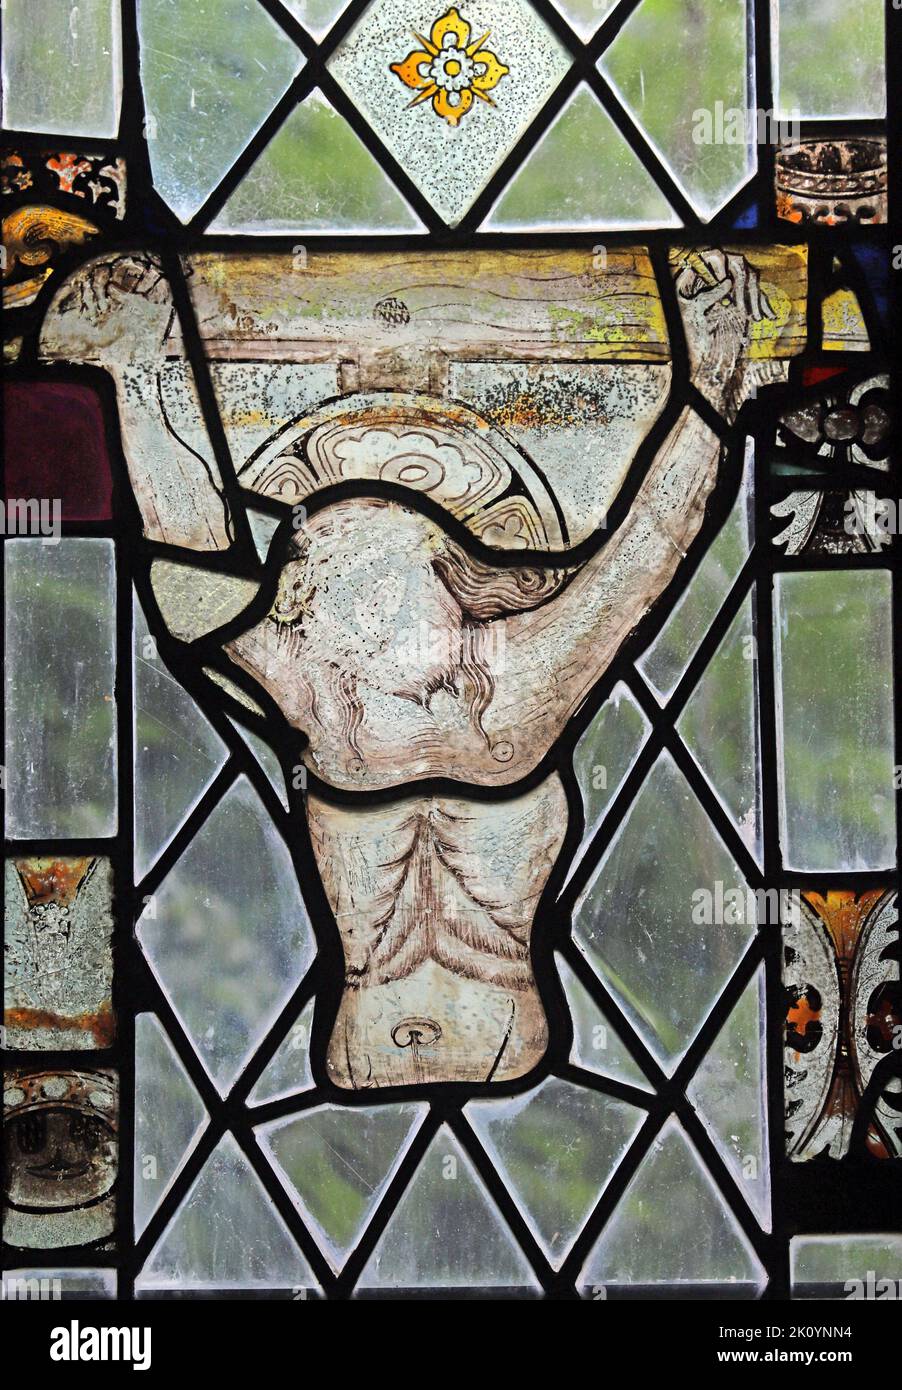 15th century stained glass depicting the crucifixion of Jesus, St Sidwell's Church, Laneast, Cornwall Stock Photo